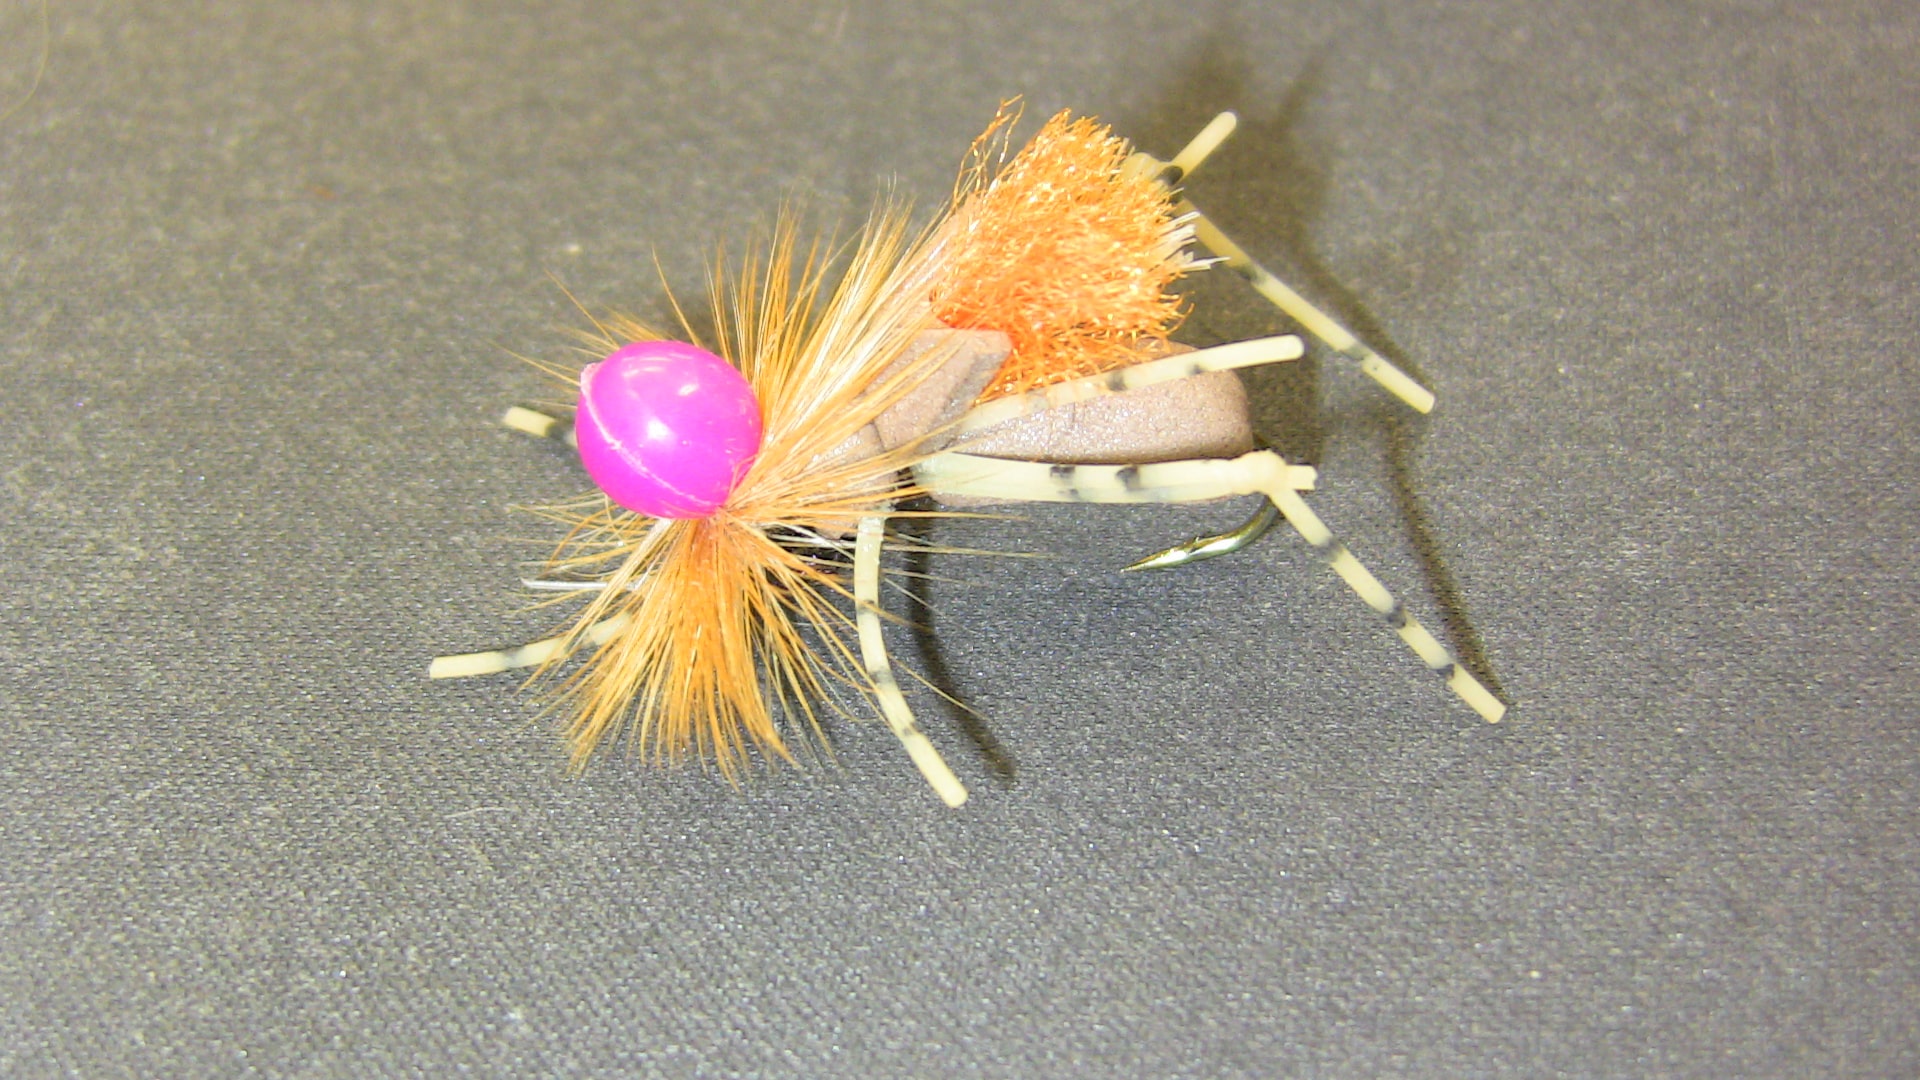 Strike Indicators For Fly Fishing An Overview of